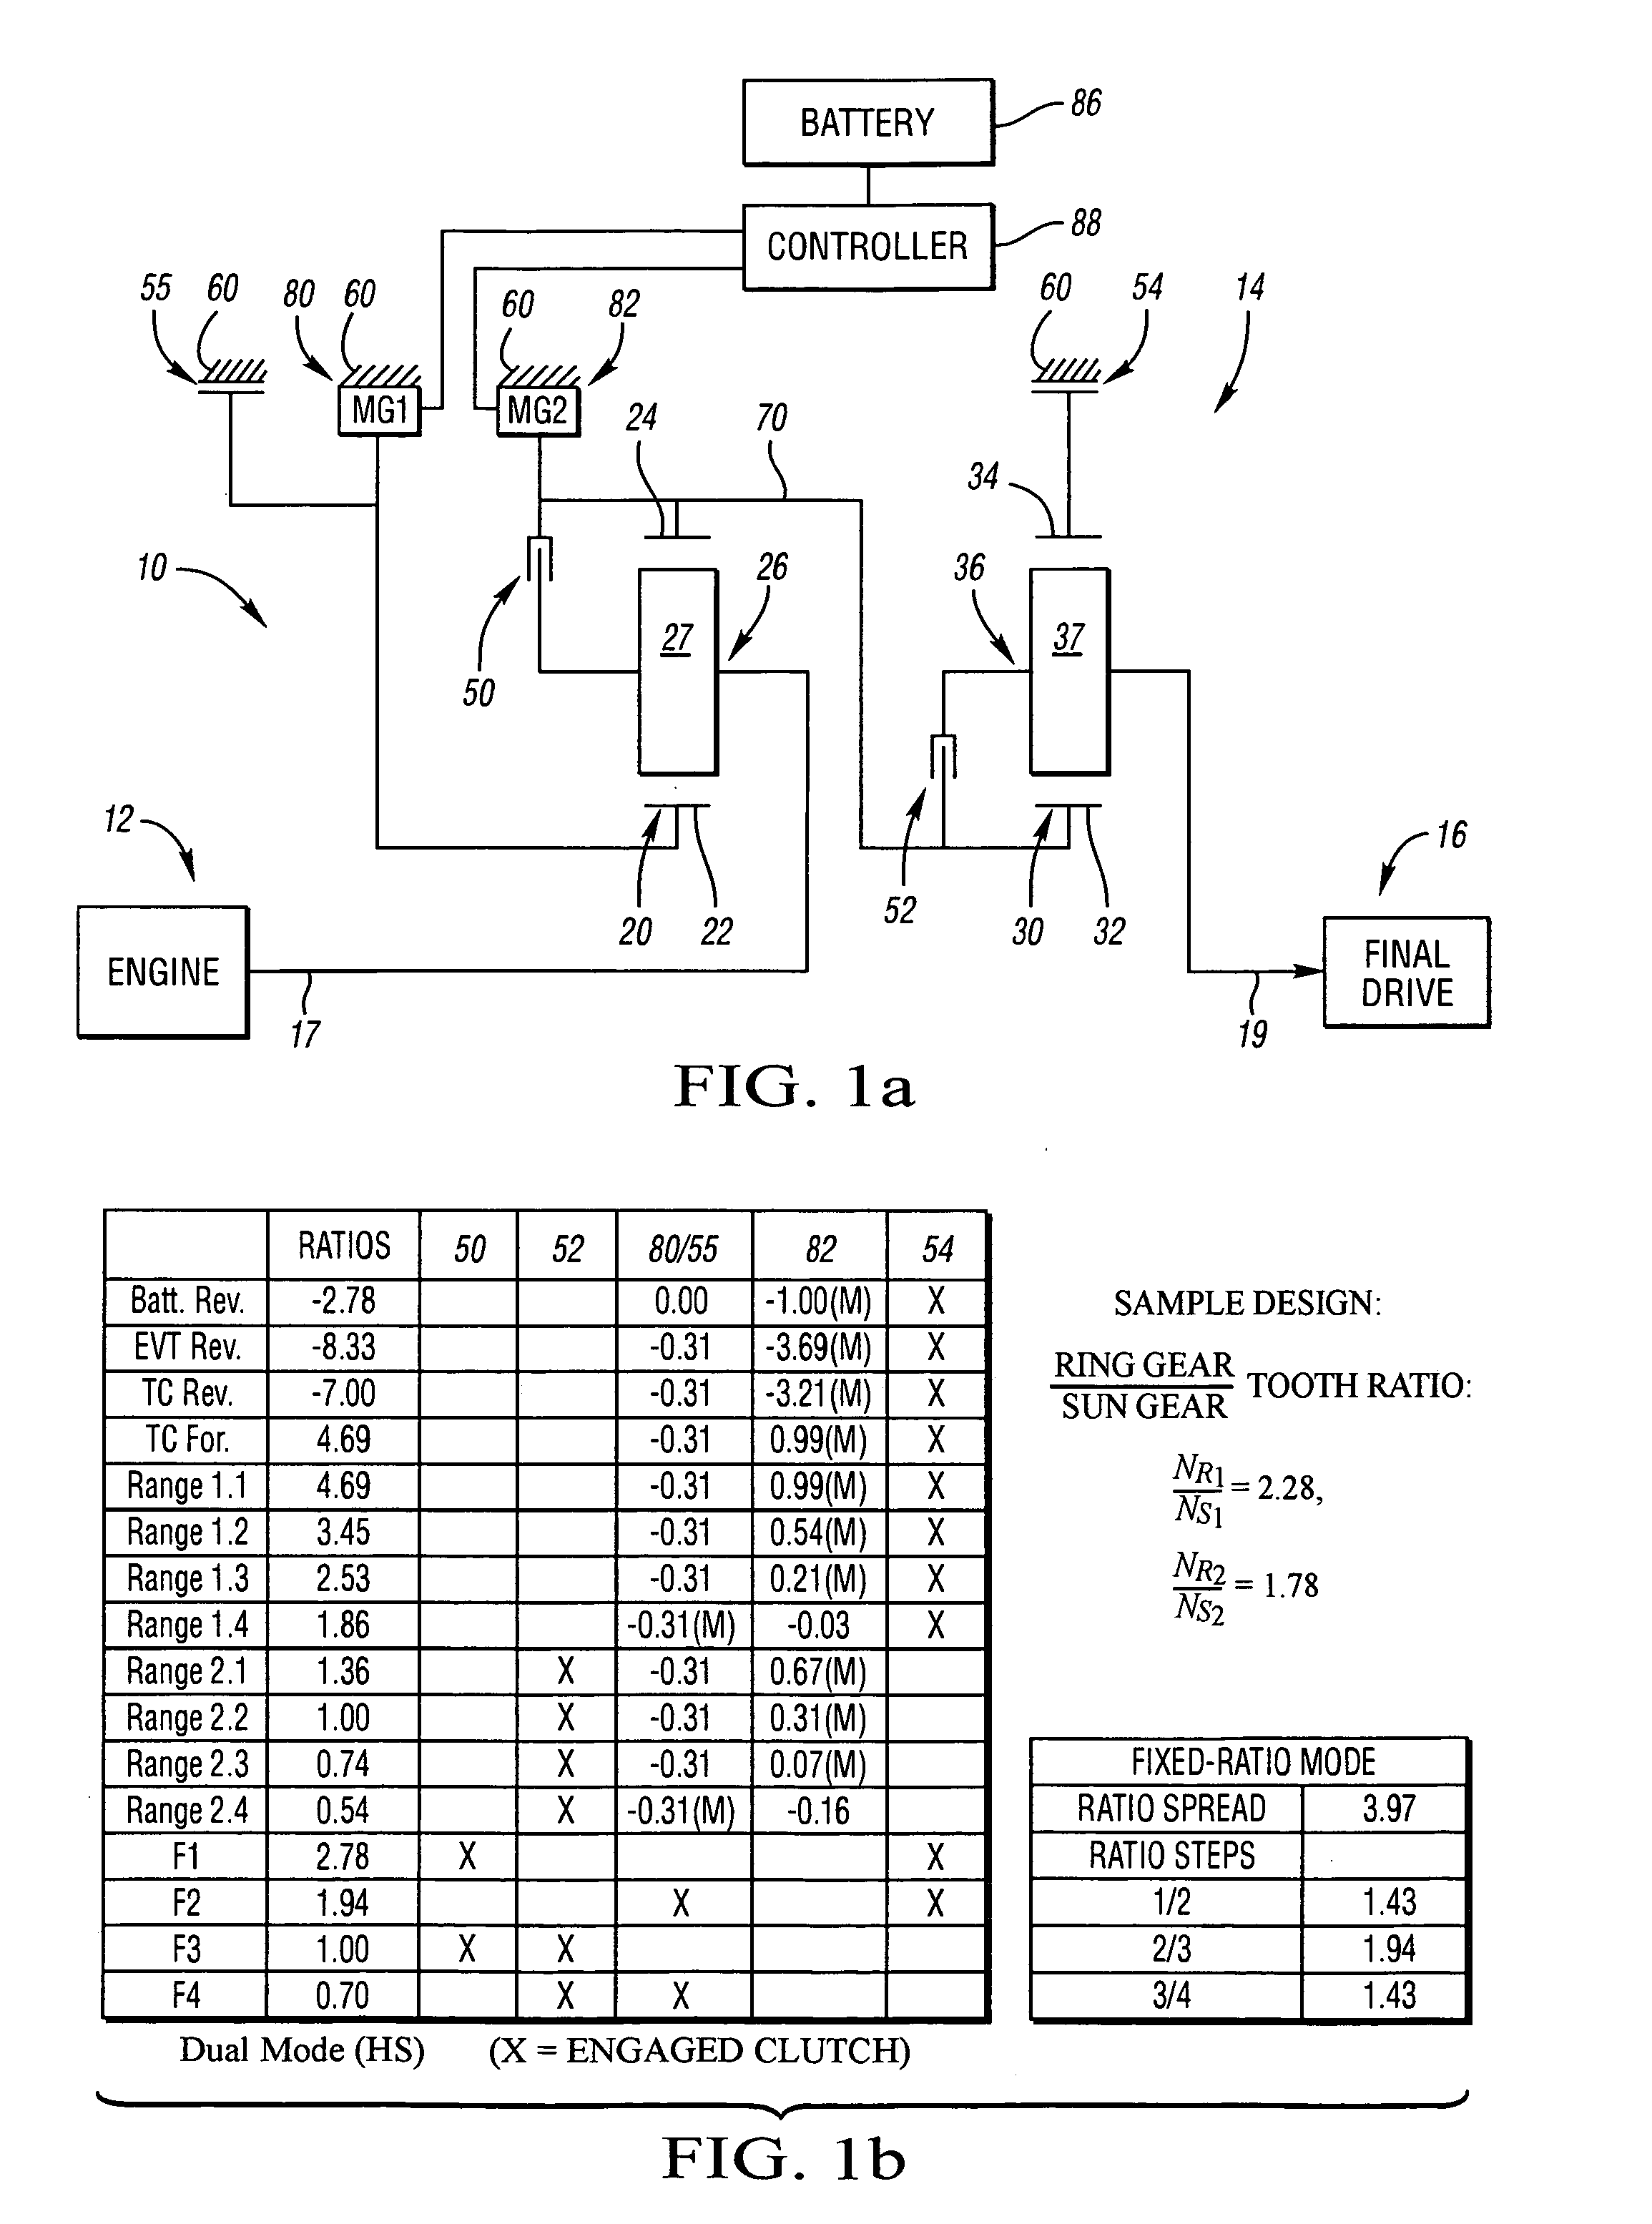 Electrically variable transmission having two planetary gear sets with one fixed interconnection